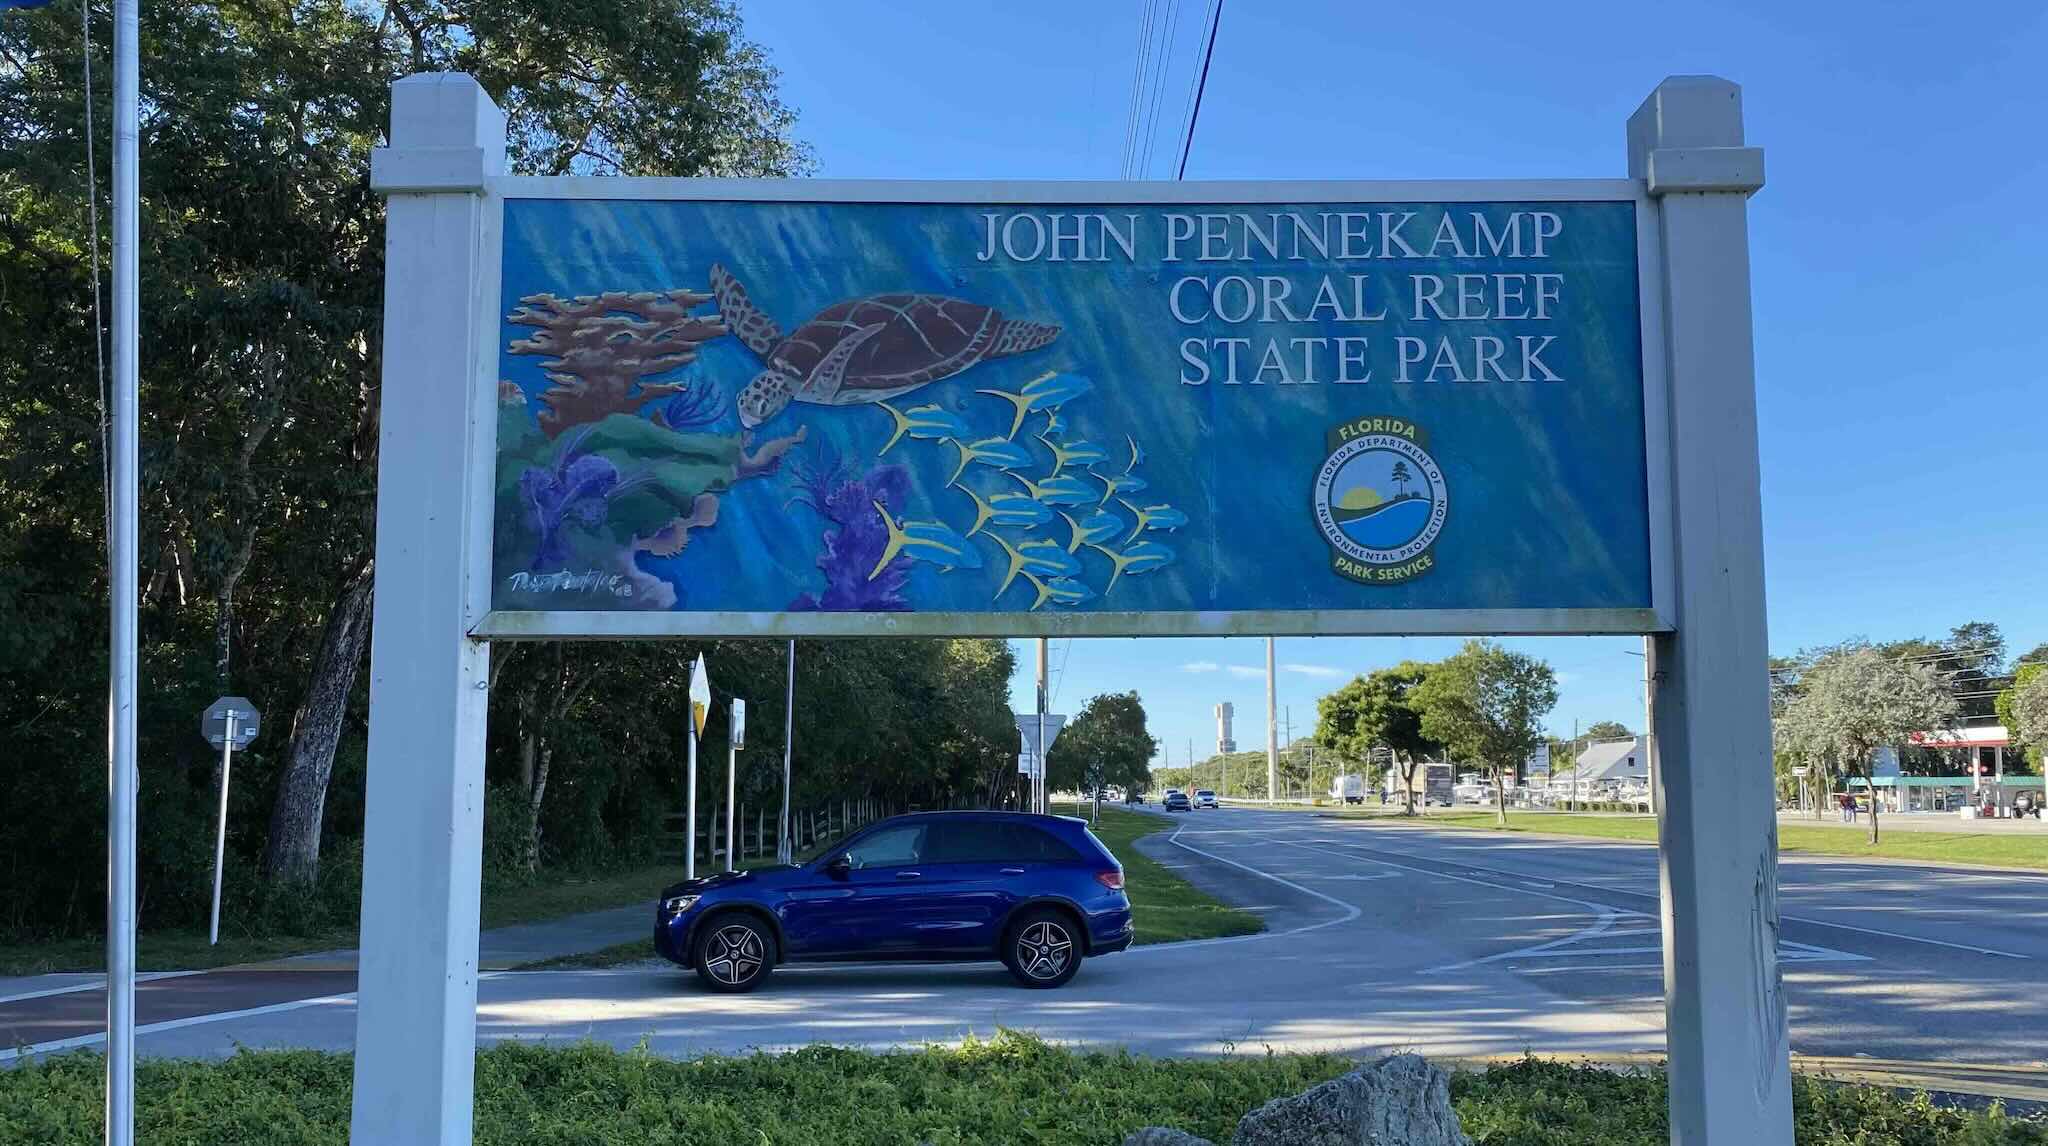 John Pennekamp Coral Reef State Park sign with car